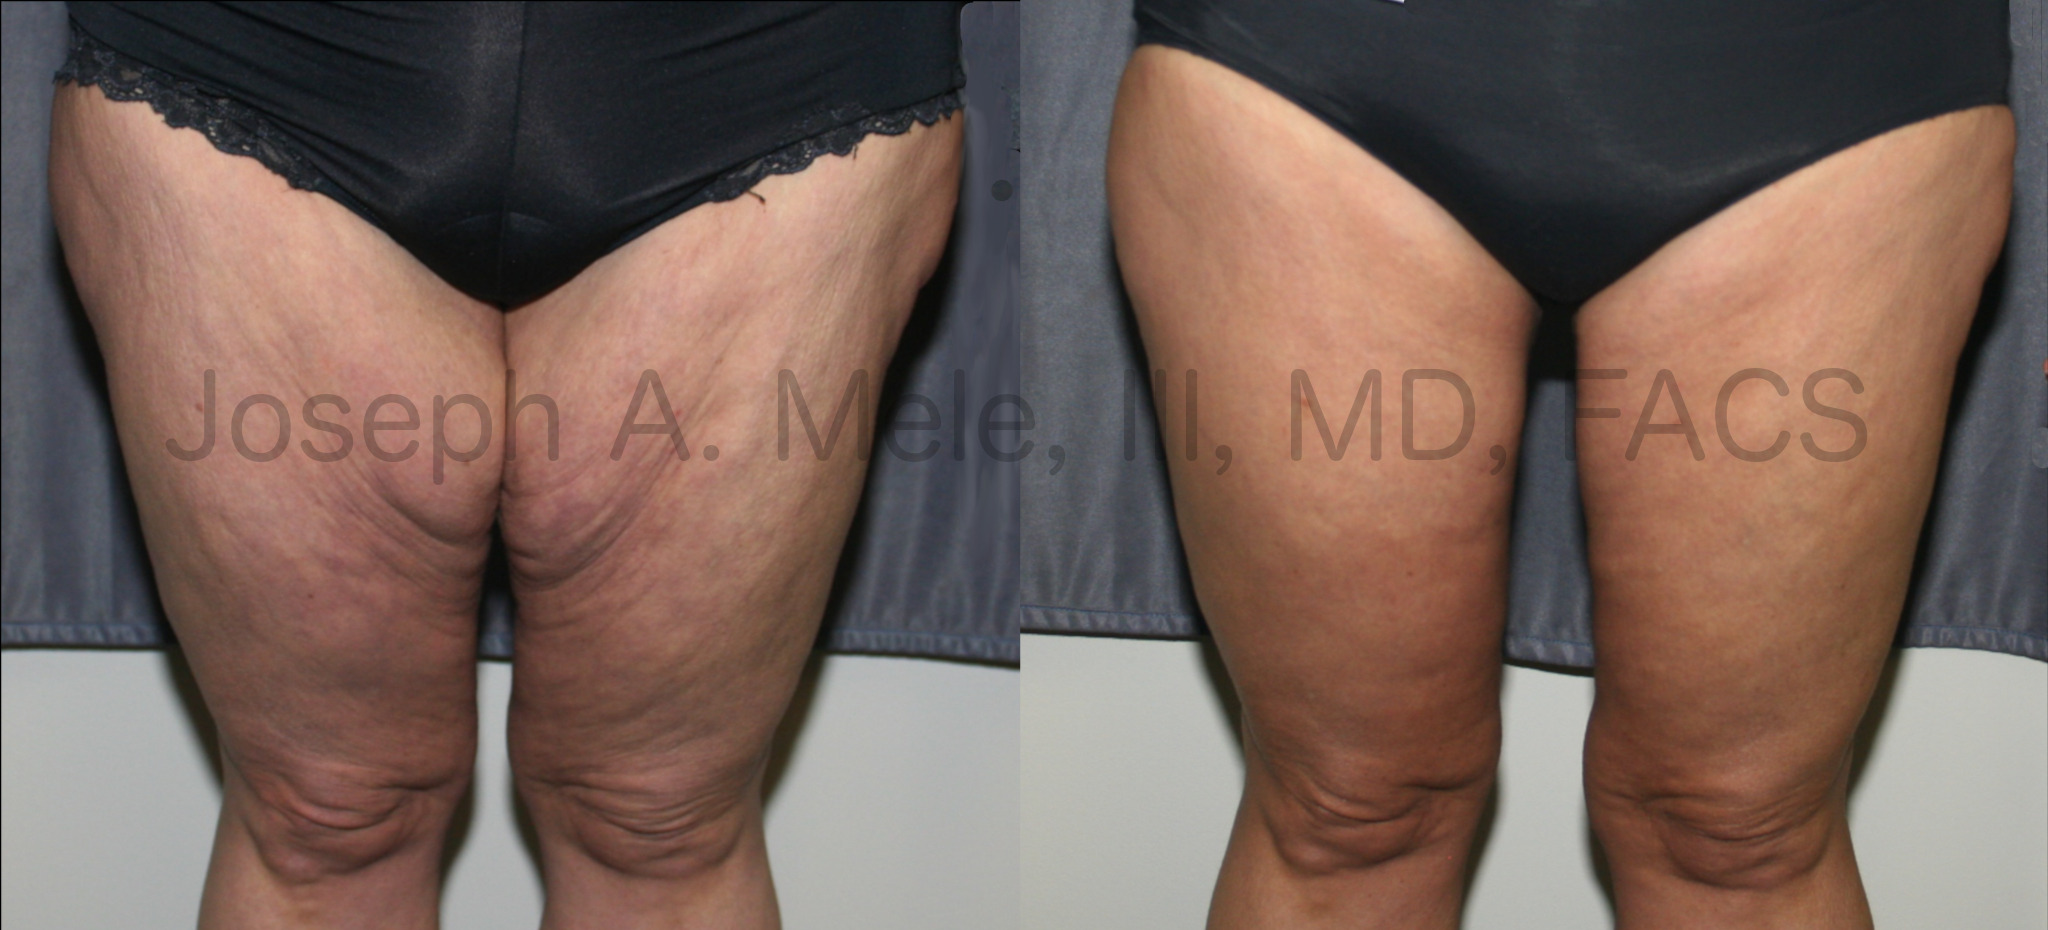 Thigh Lift before and after pictures (thighplasty after weight loss)